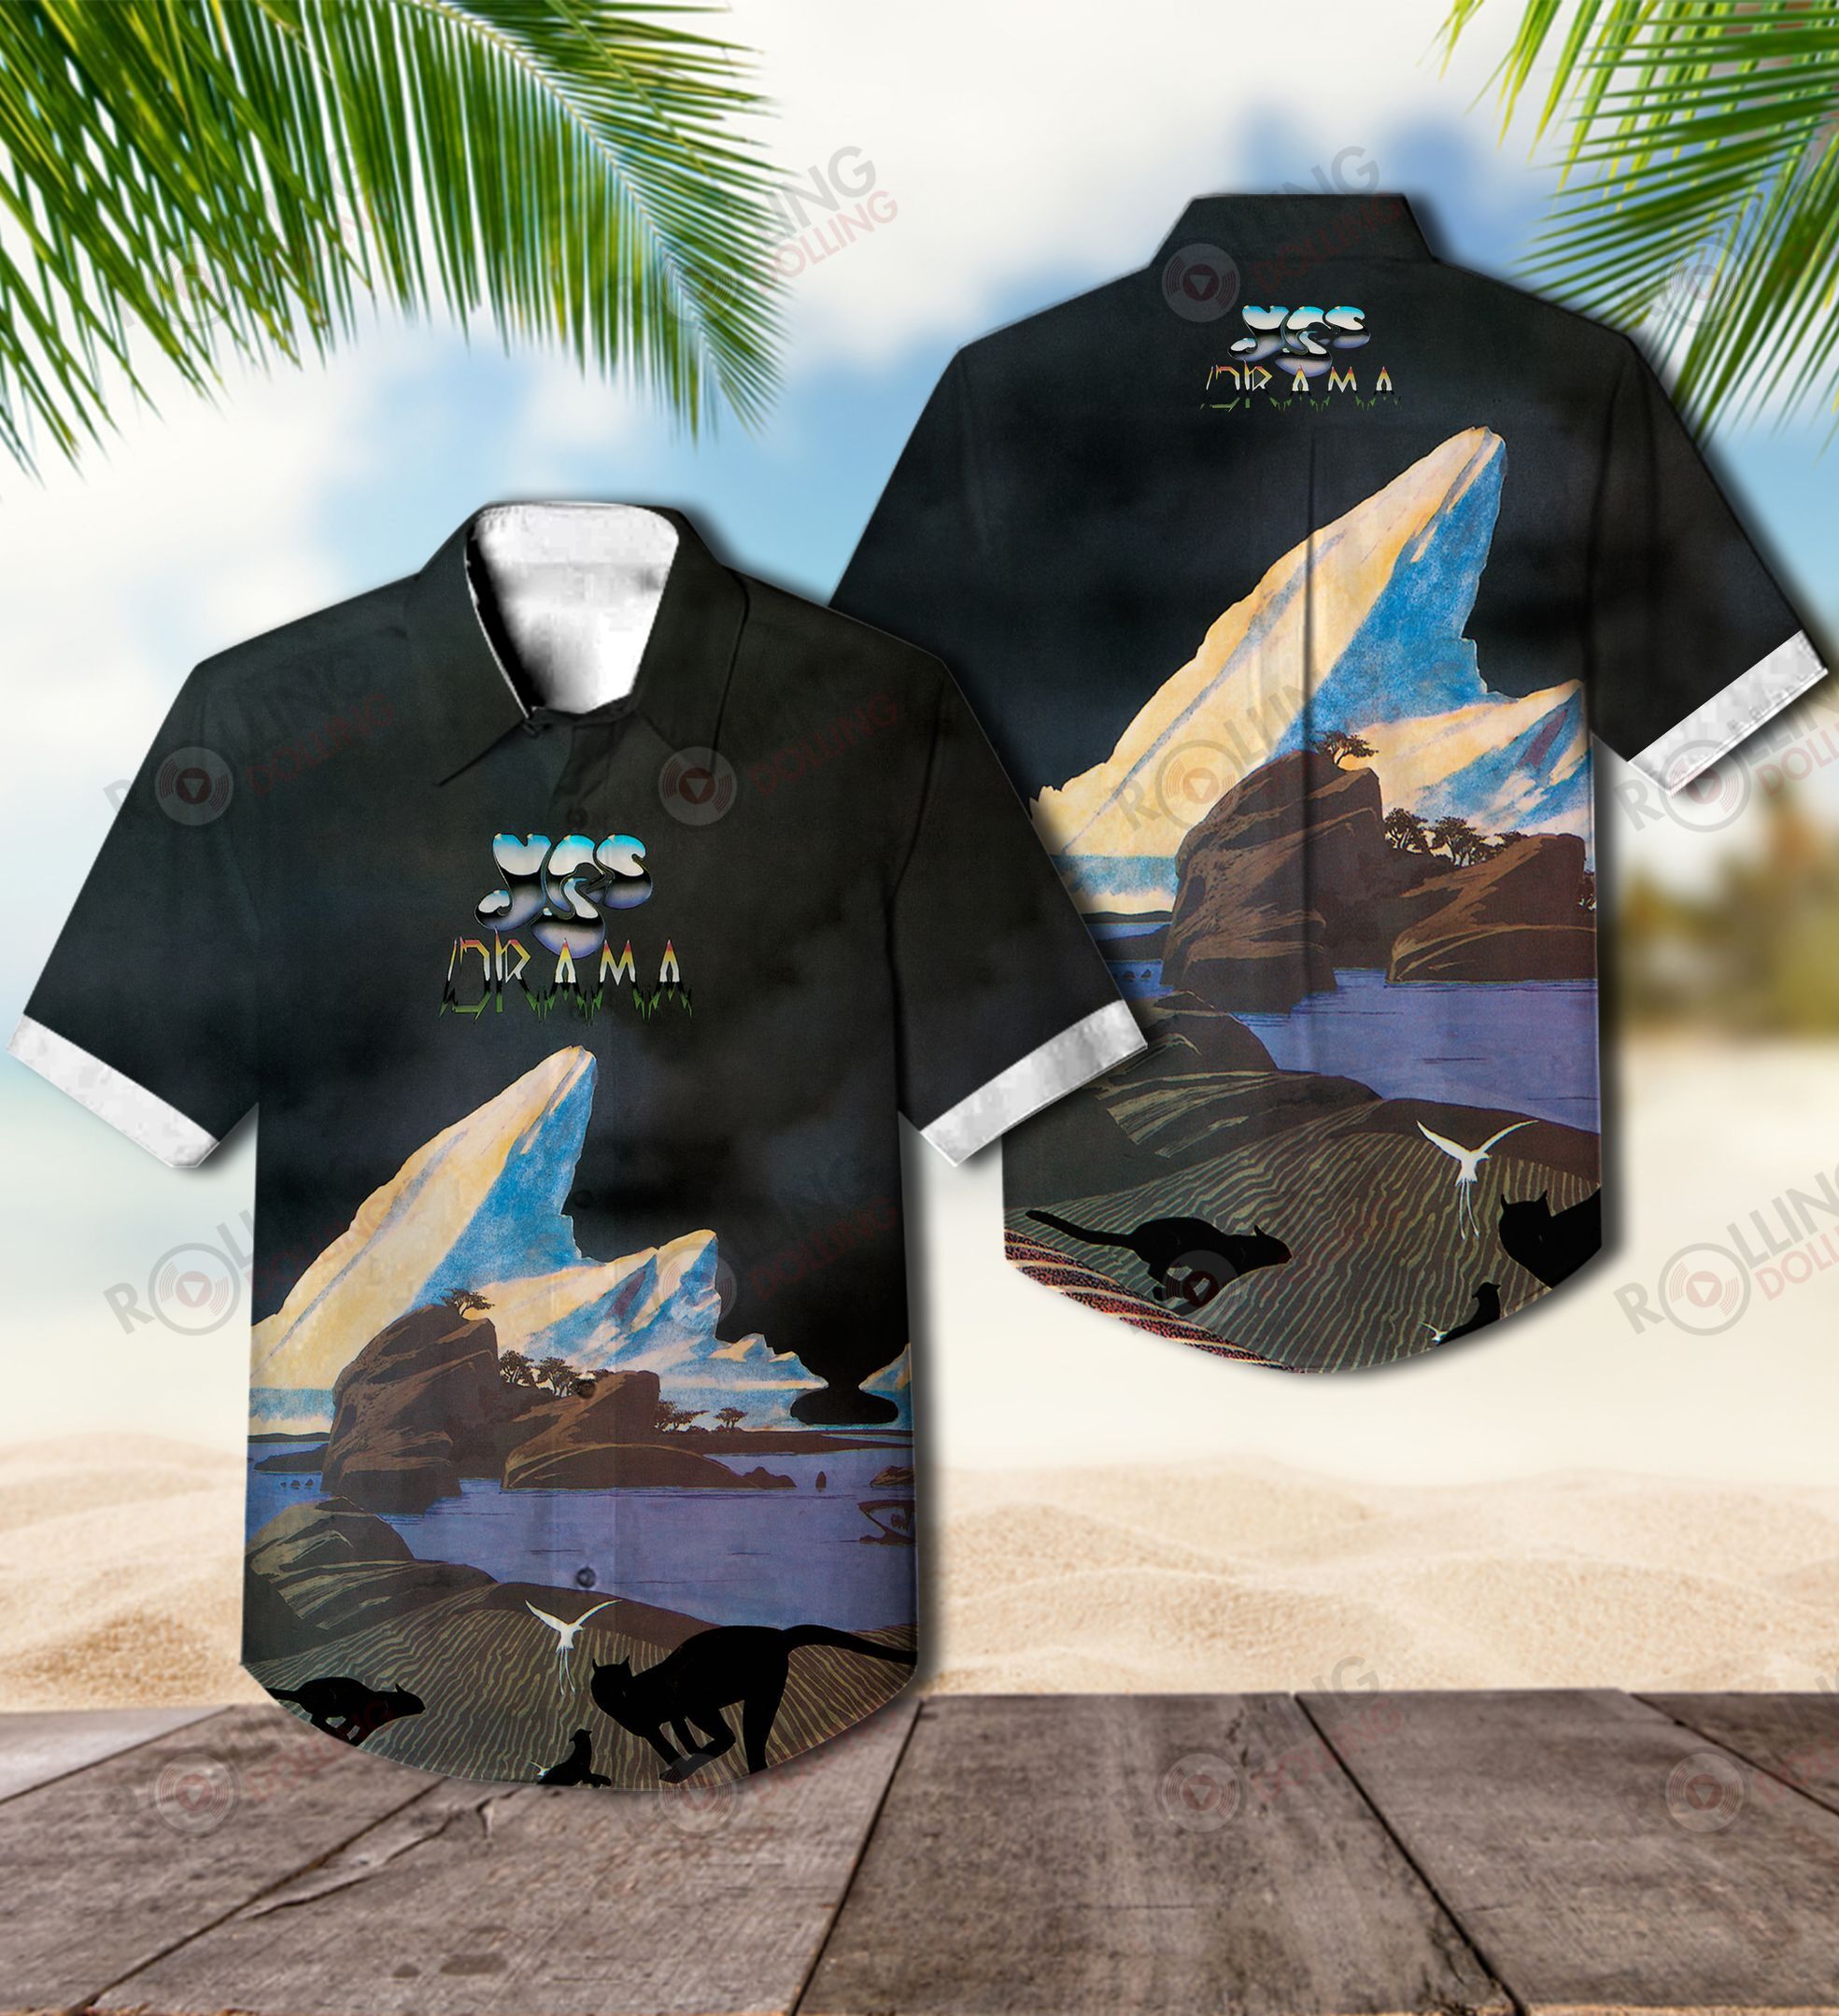 Now you can show off your love of all things band with this Hawaiian Shirt 117